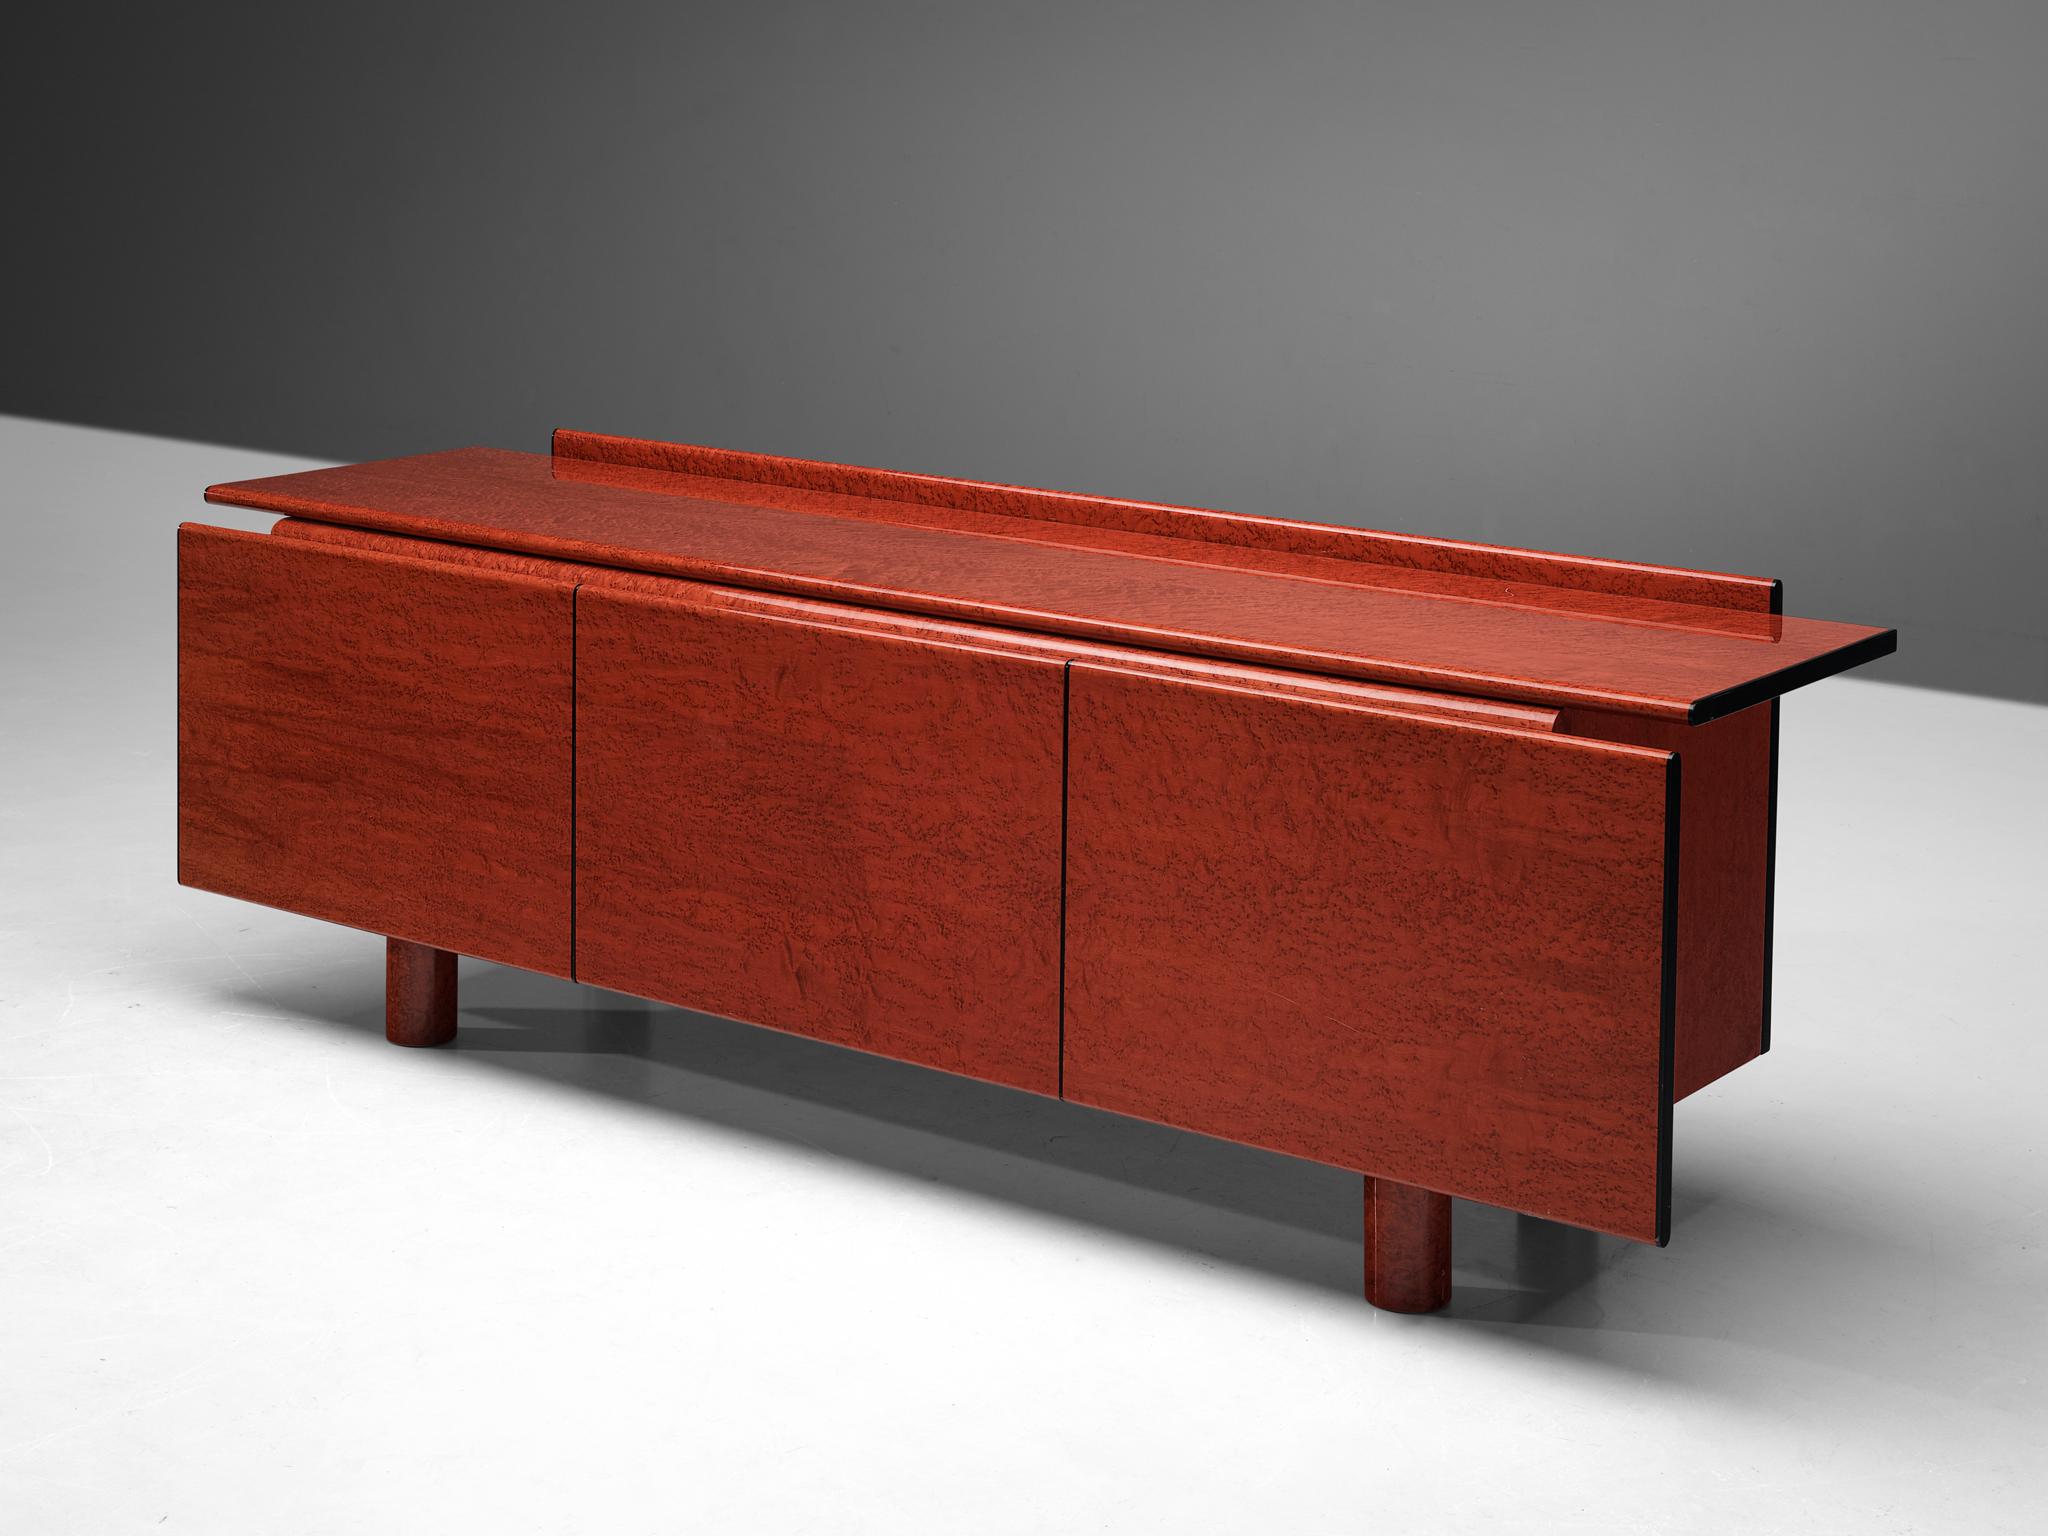 Carlo Marelli & Massimo Molteni 'Tula' Sideboard in Red Birdseye Maple In Good Condition For Sale In Waalwijk, NL